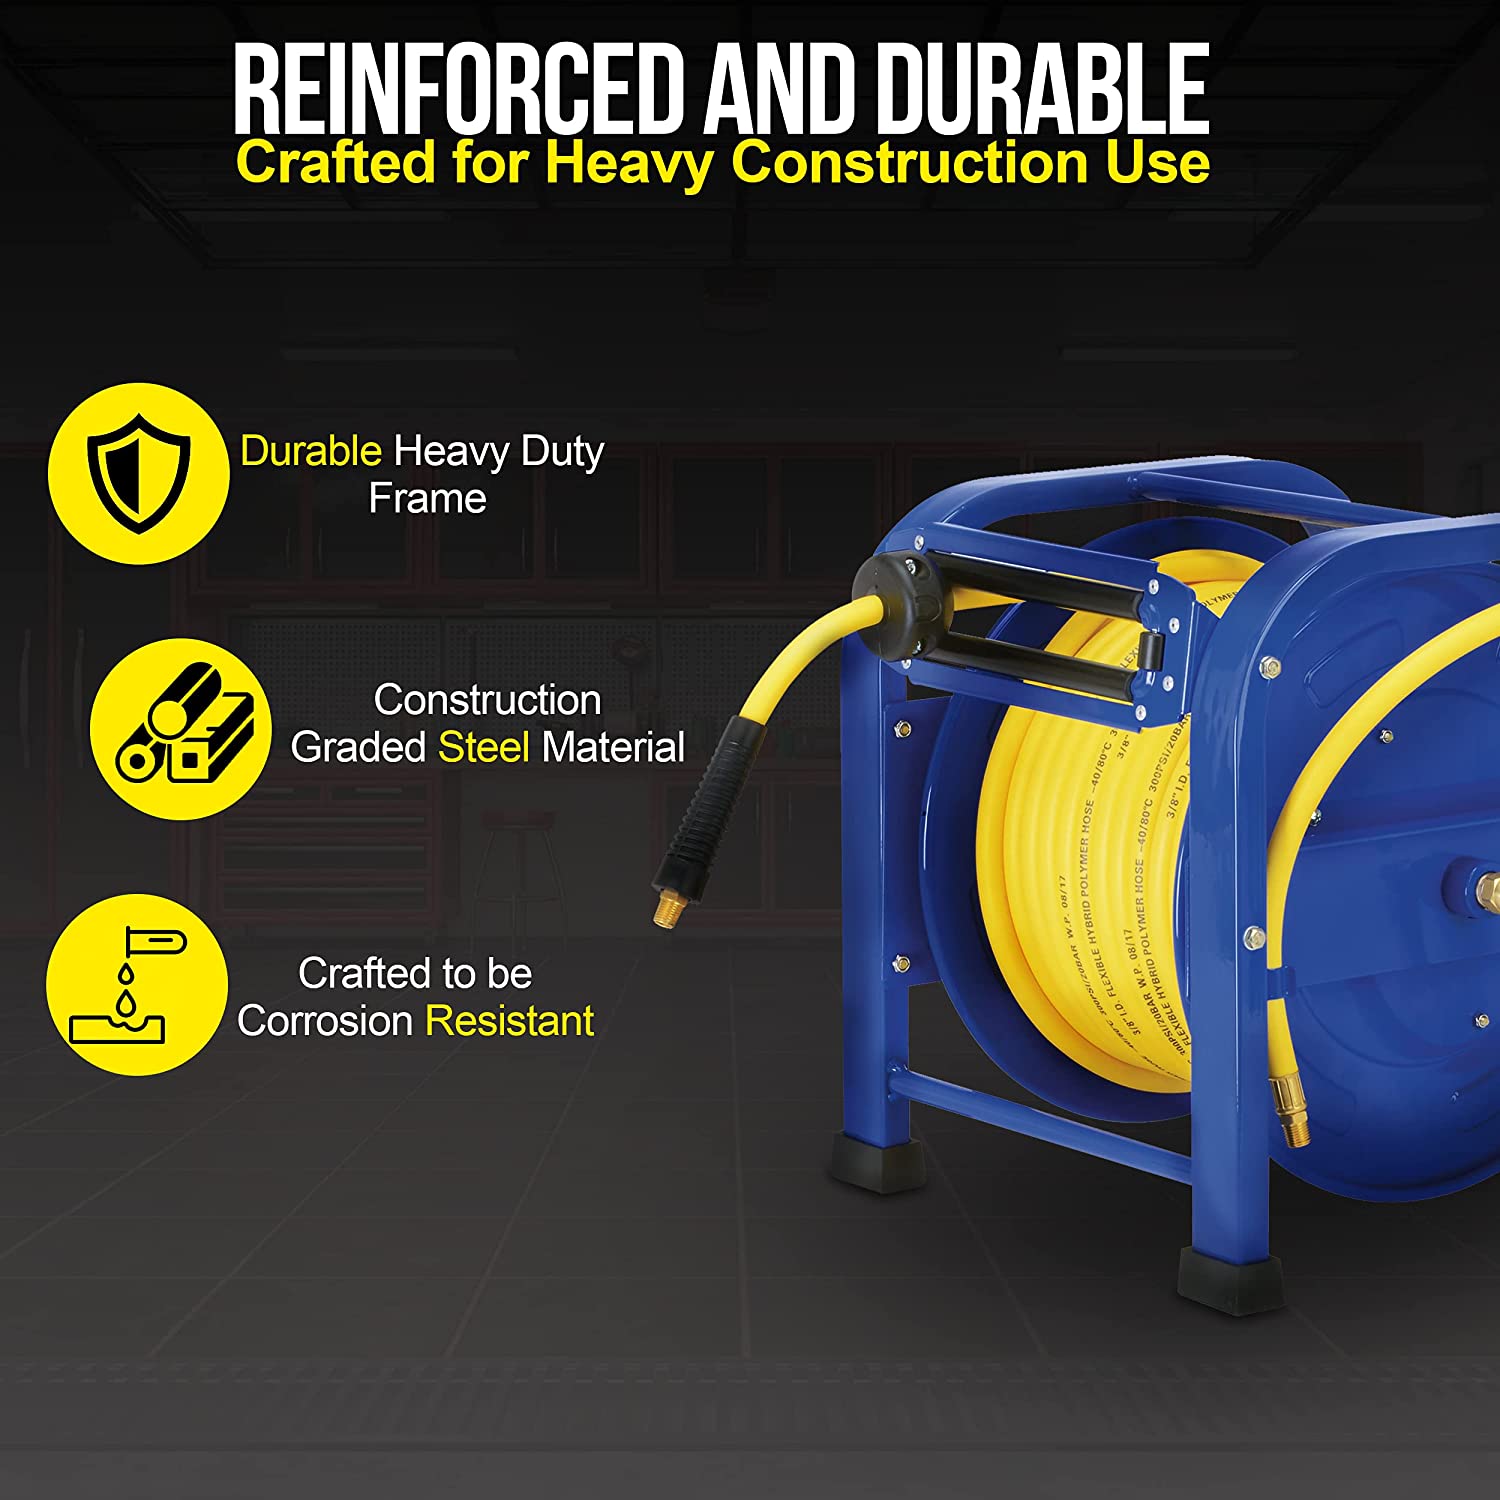 Goodyear, Goodyear 3/8" x 100' 3/8" MNPT Connections Portable Industrial Retractable Air Hose Reel New